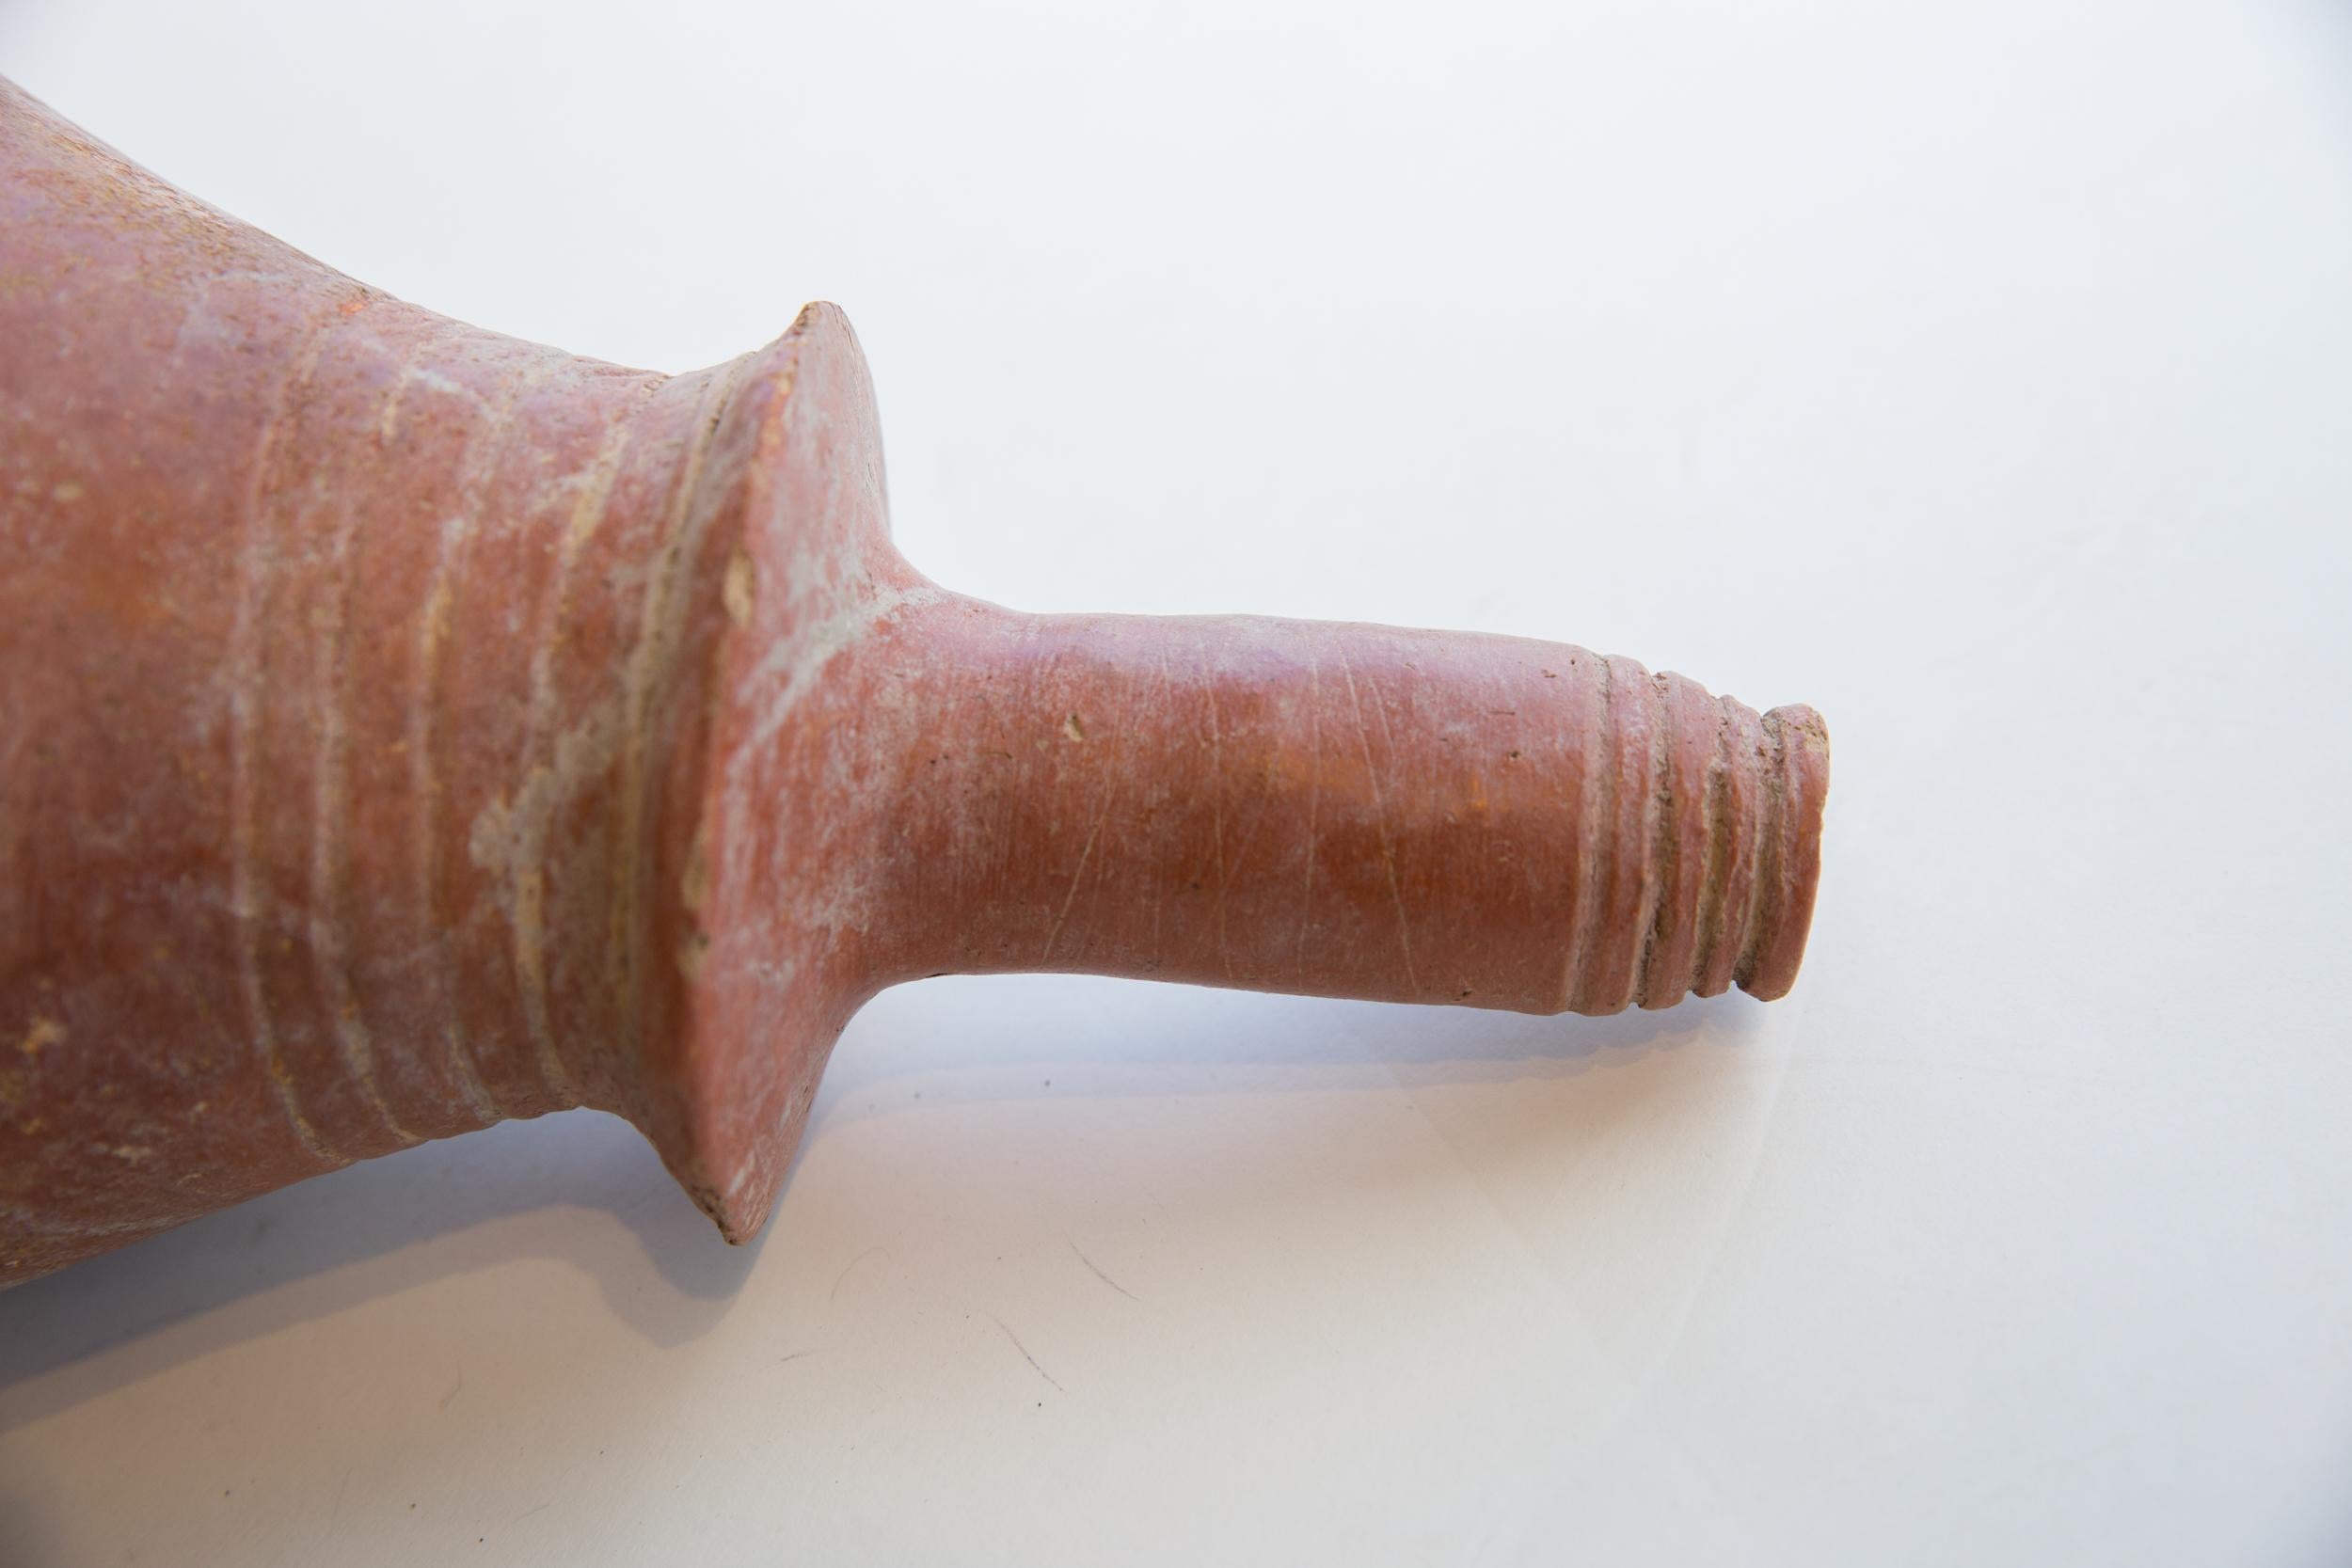 Antique handmade African red slip ware vase. Circa 300-600 CE (AD), this beautiful handmade piece red slip ware pottery was handmade in North Africa. This piece is unique collectible, with great craftsmanship having gone into its creation! As this